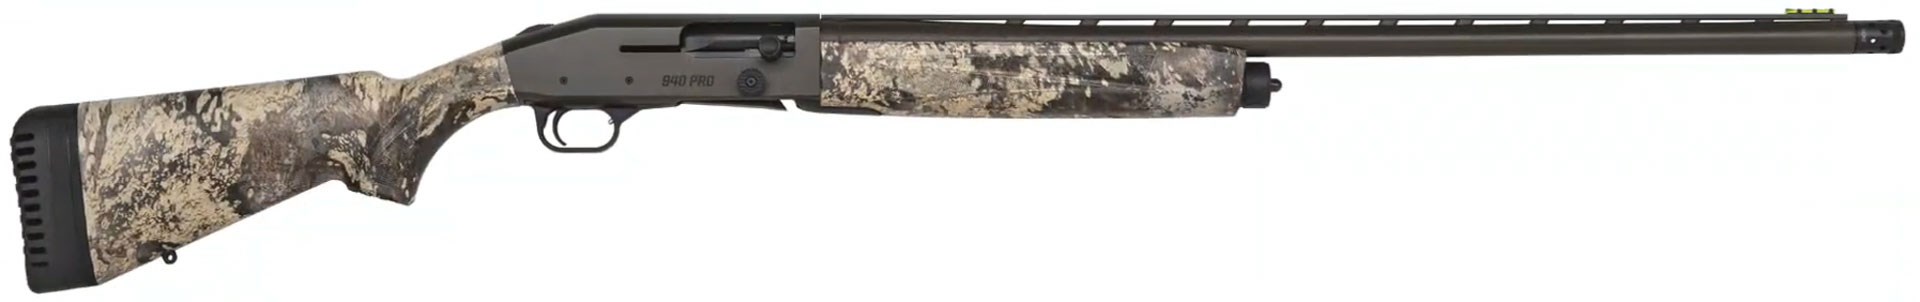 Mossberg 940 Pro Waterfowl on White